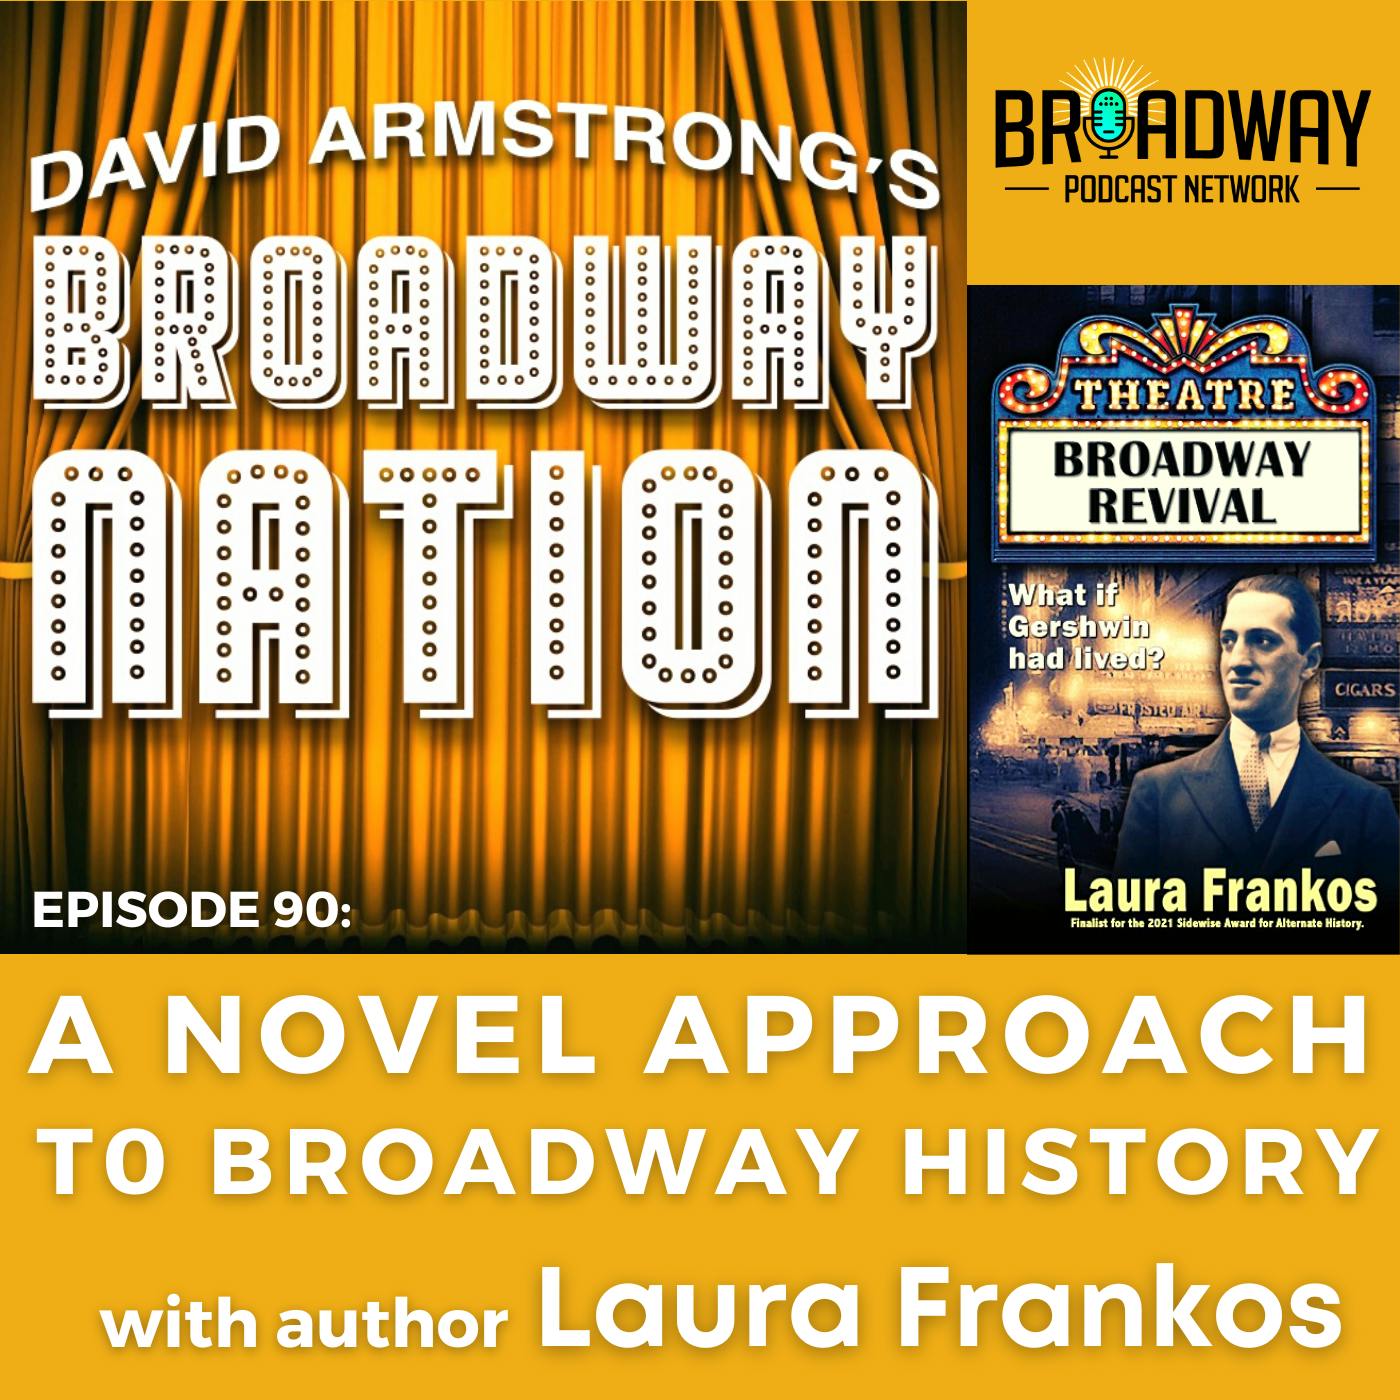 Episode 90: A Novel Approach To Broadway History